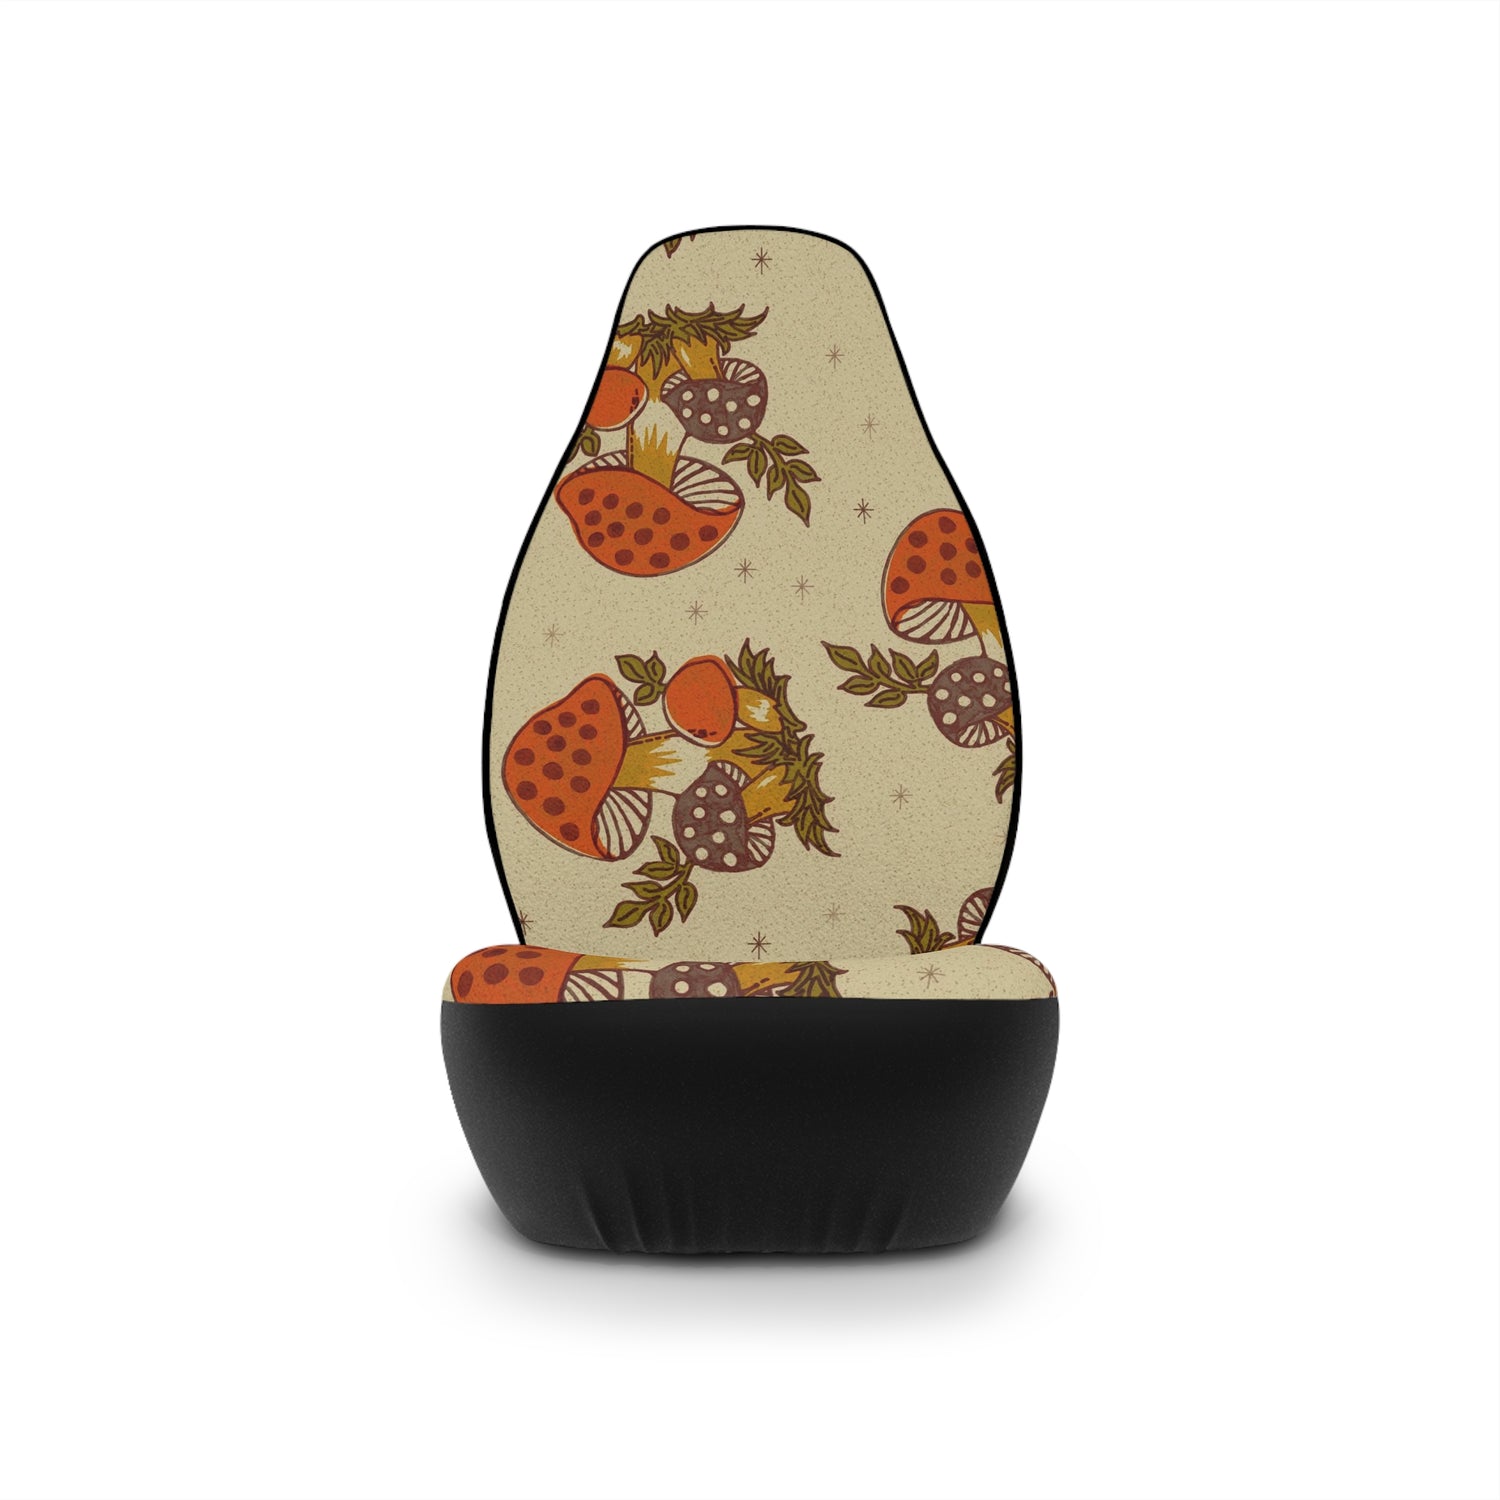 60s 70s Merry Mushroom Retro Car Seat Covers, Orange Brown Groovy Hippie, Hipster Car Accessories